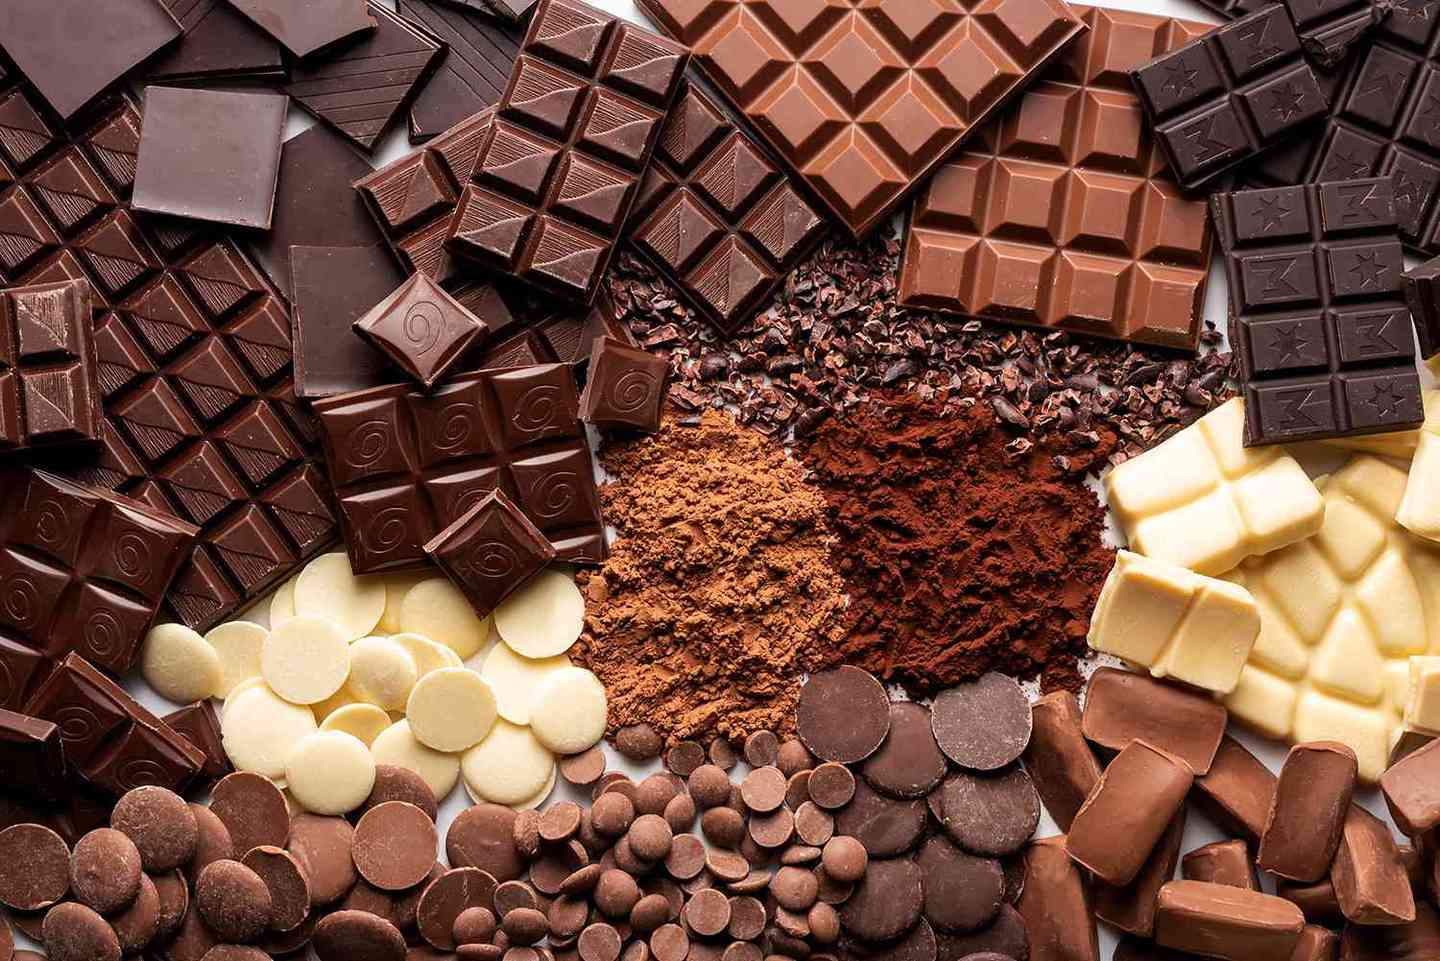 IELTS Speaking Part 1 topic Chocolate